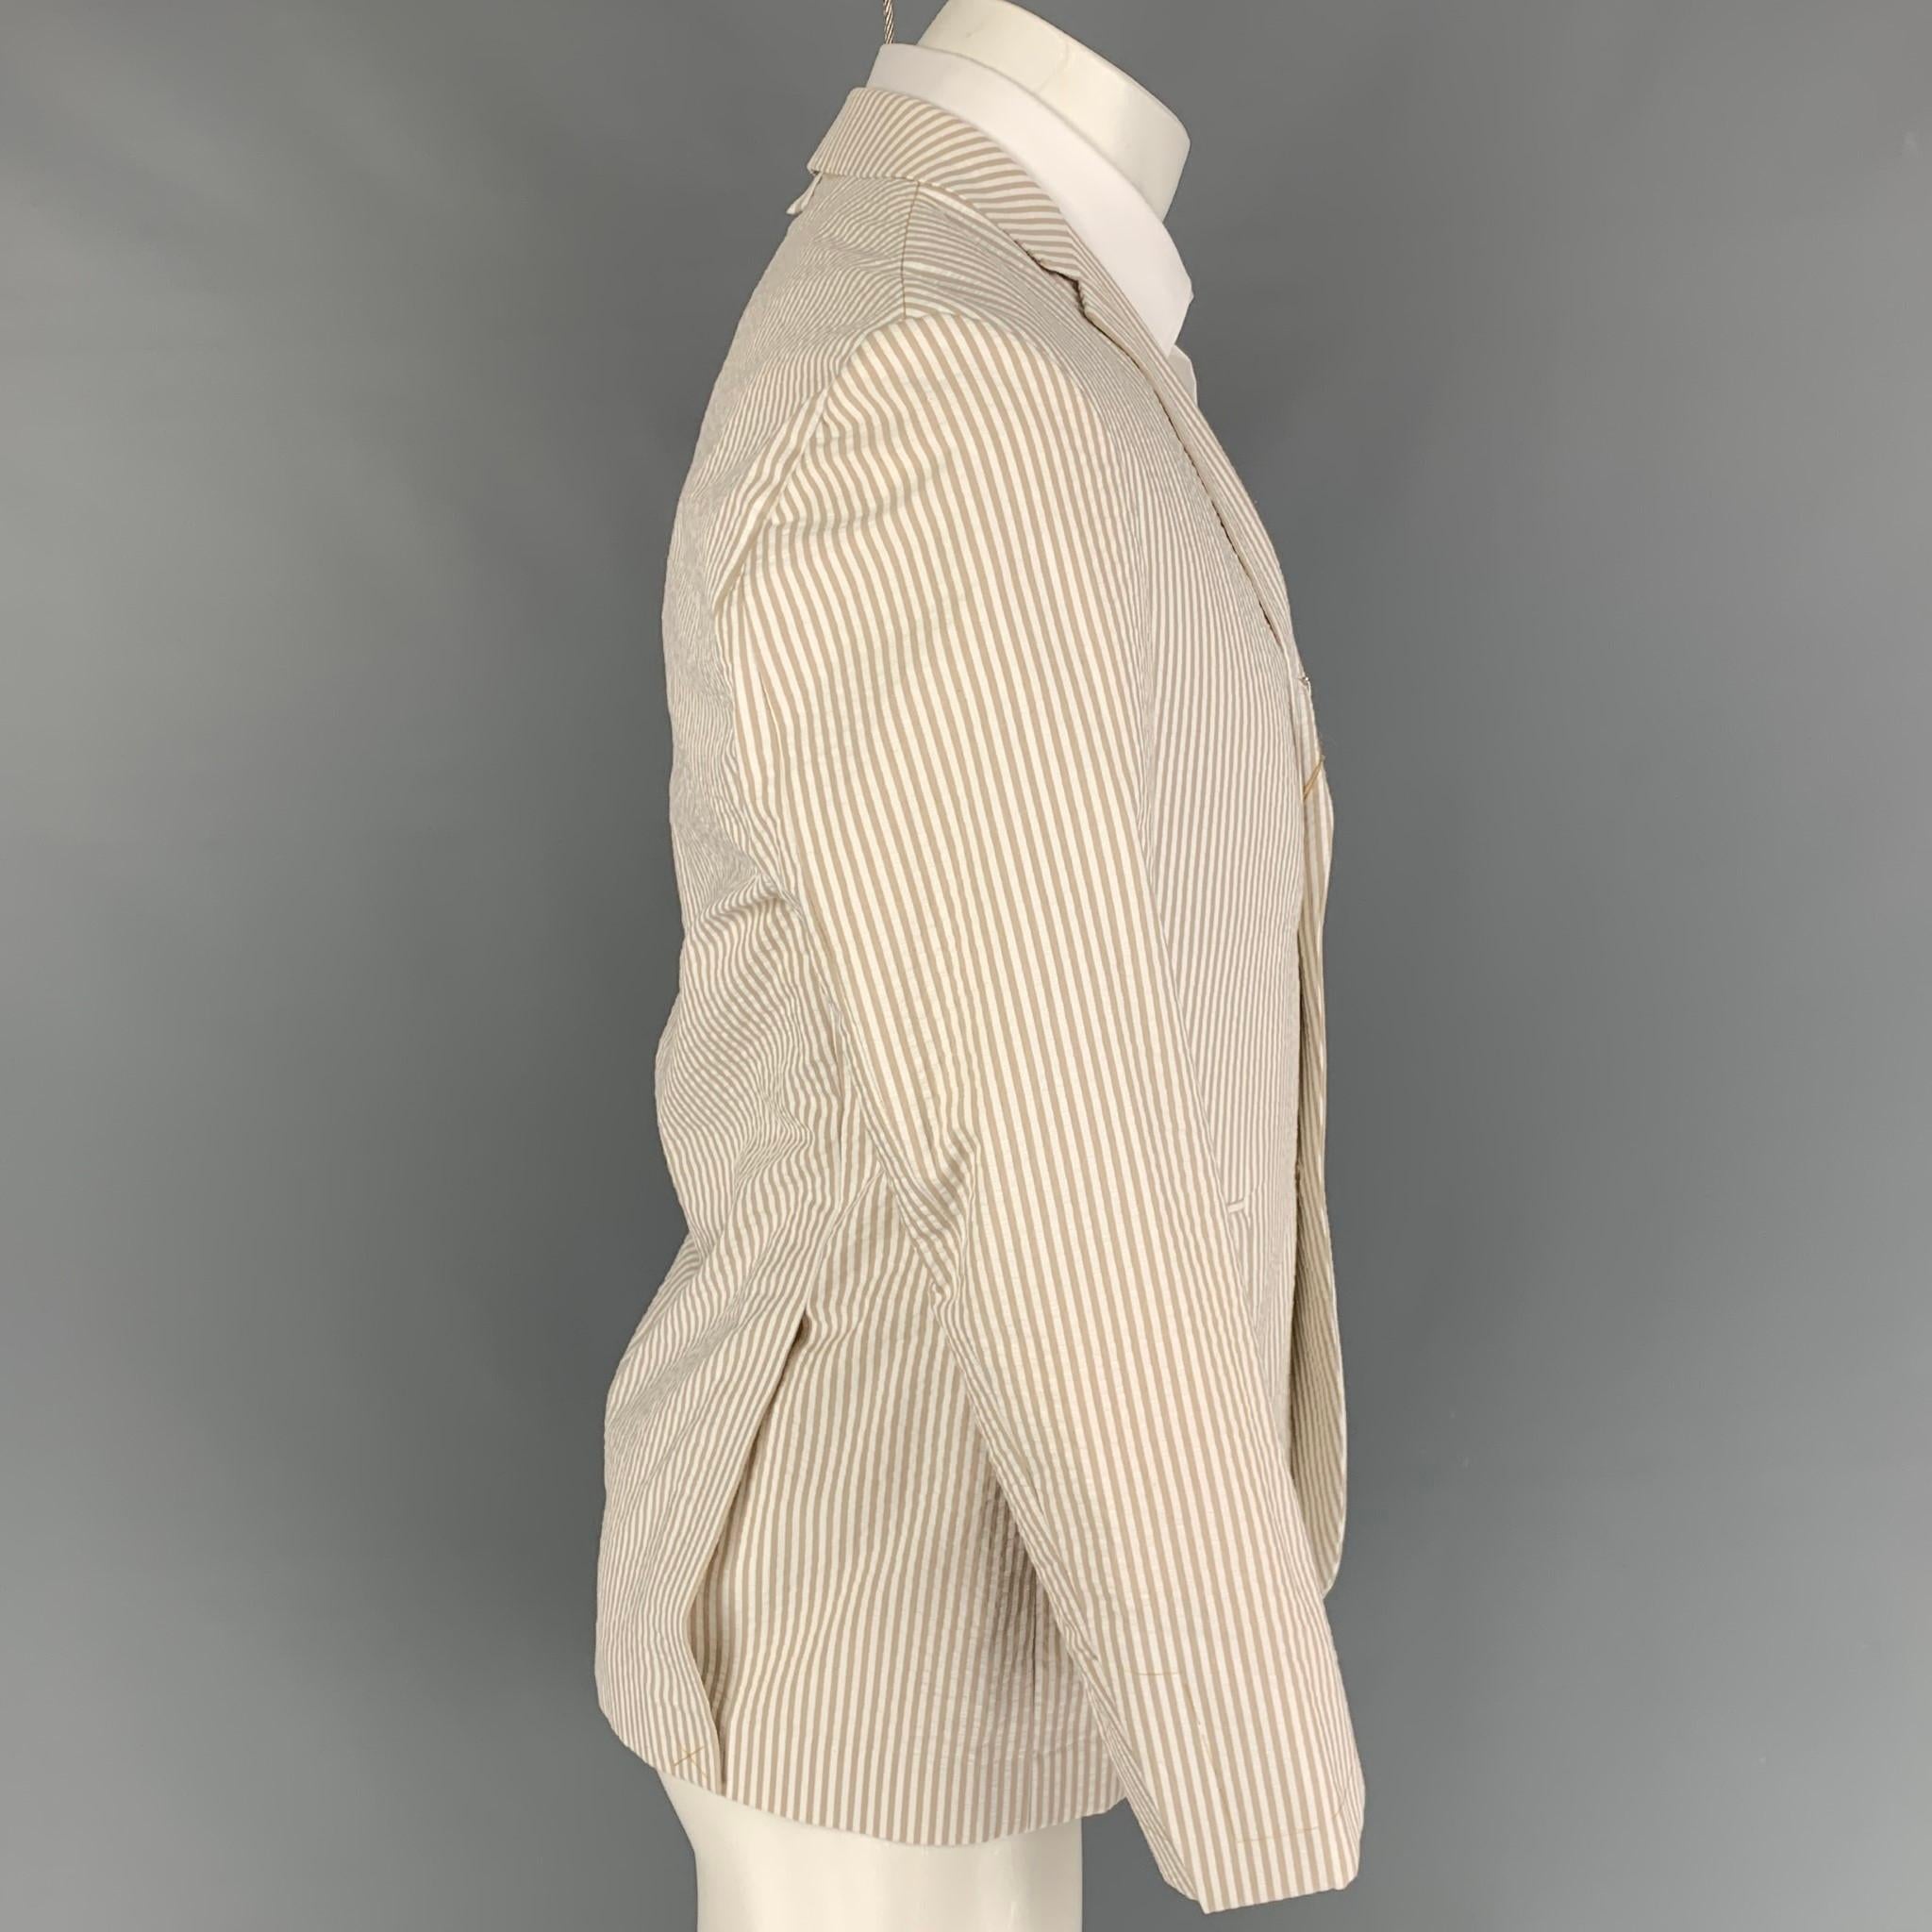 BLACK FLEECE sport coat comes in a taupe & white stripe cotton featuring a half liner featuring a notch lapel, flap pockets, double back vent, and a three button closure. Comes with tags. 

Very Good Pre-Owned Condition. Light discoloration at